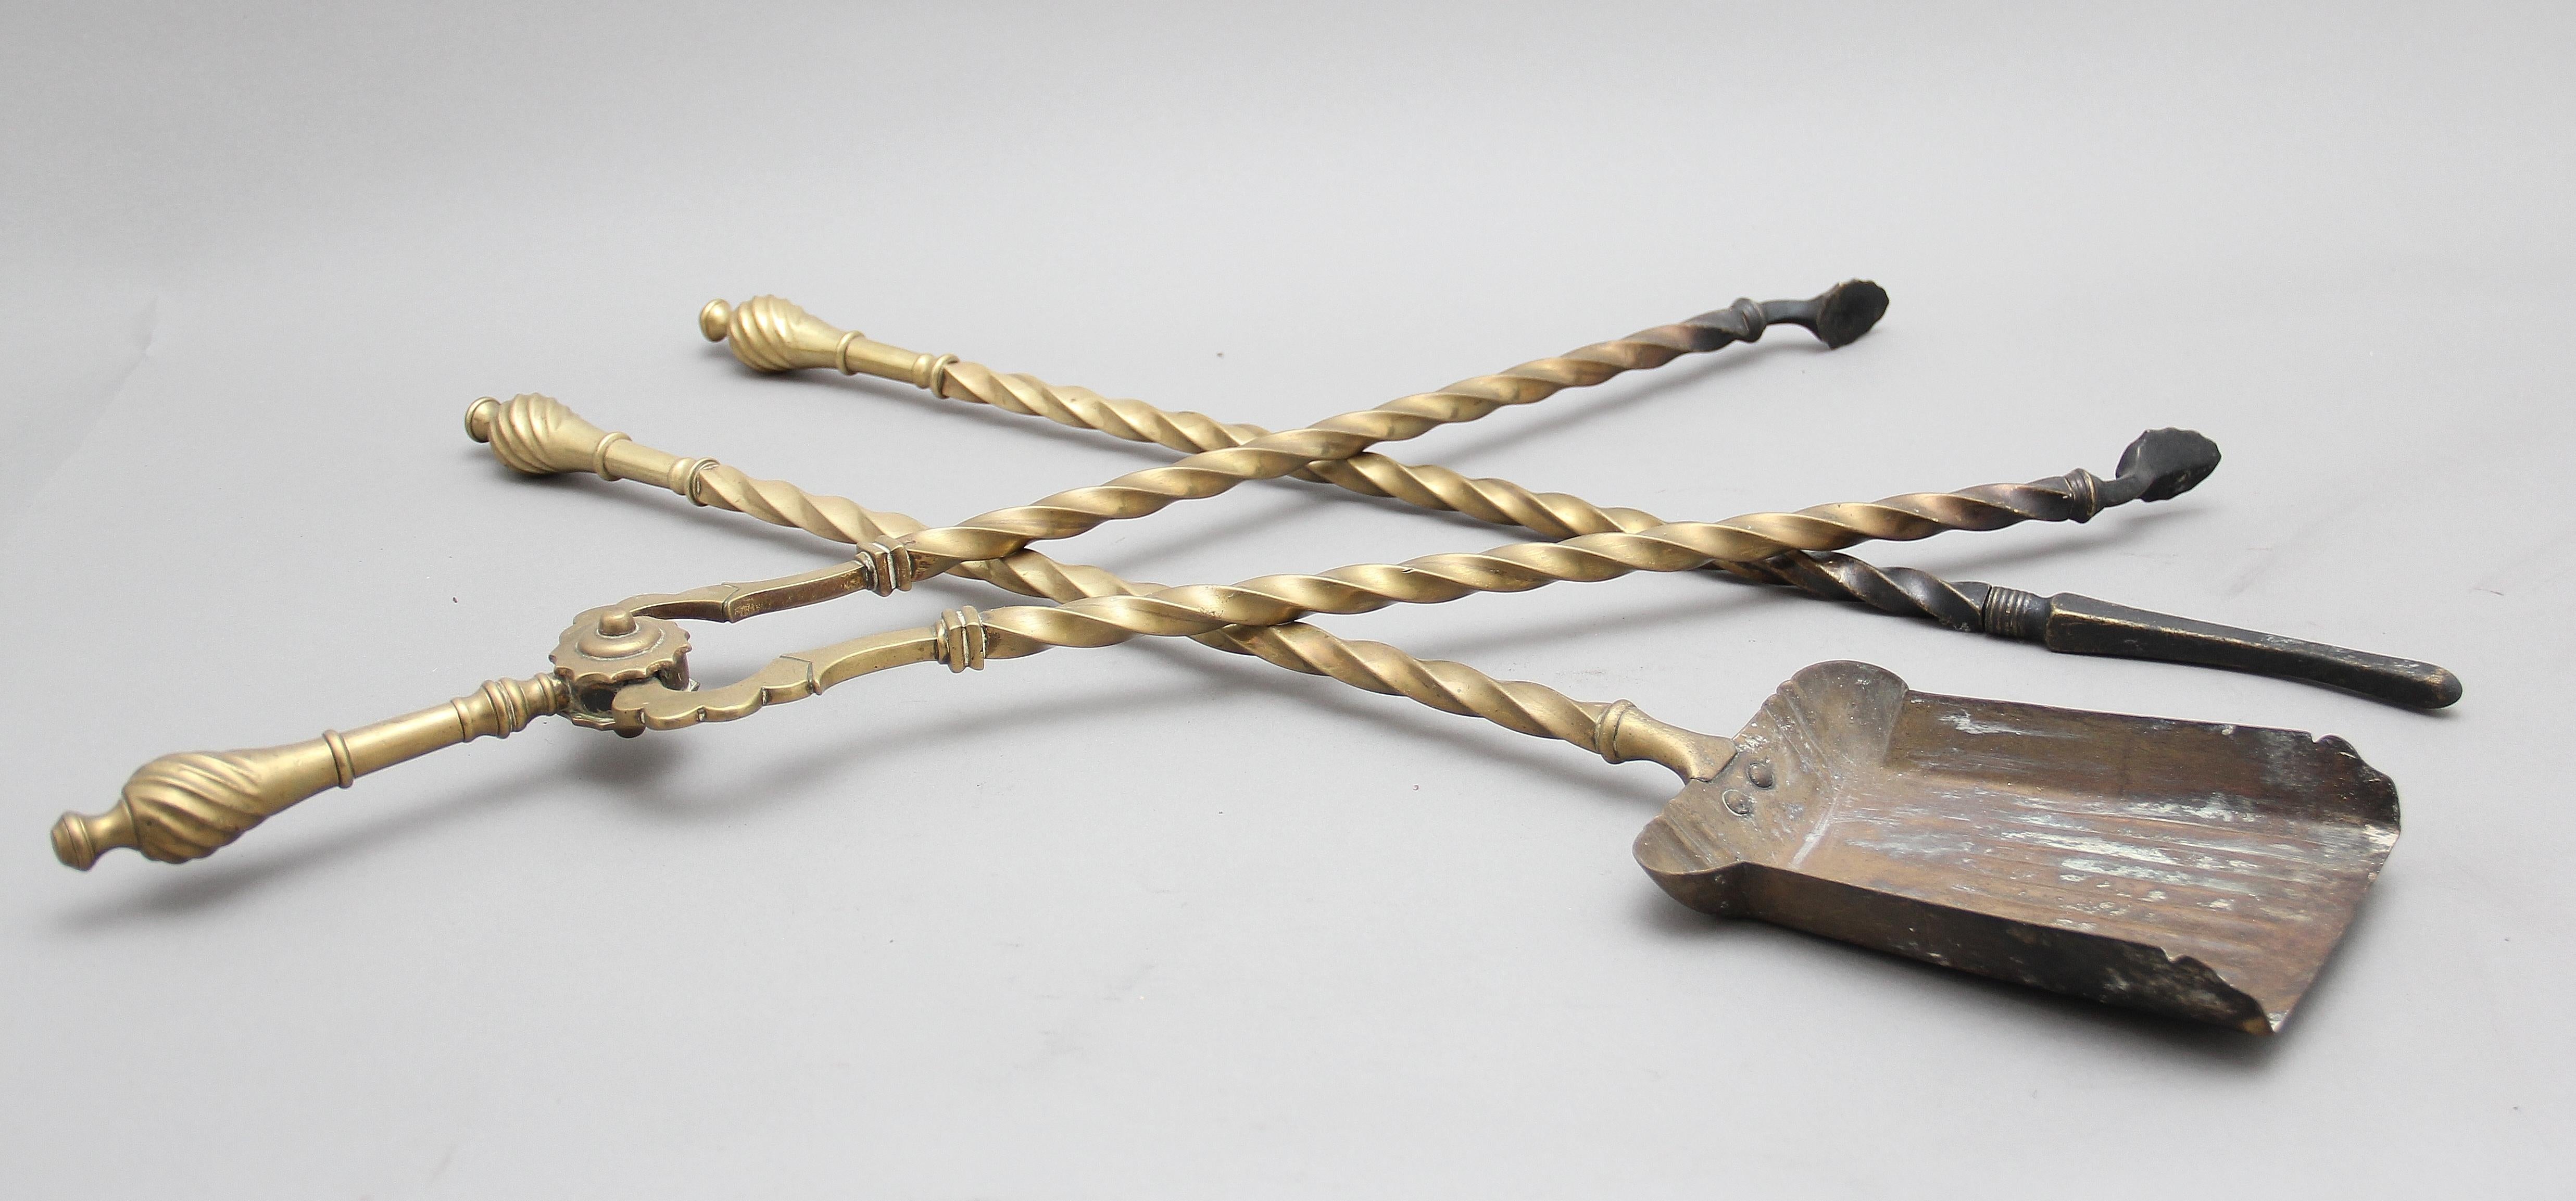 A set of three 19th Century brass fire irons of spiral design with a finial handle, the set consisting of a pair of tongs, a shovel and a poker. Circa 1860.